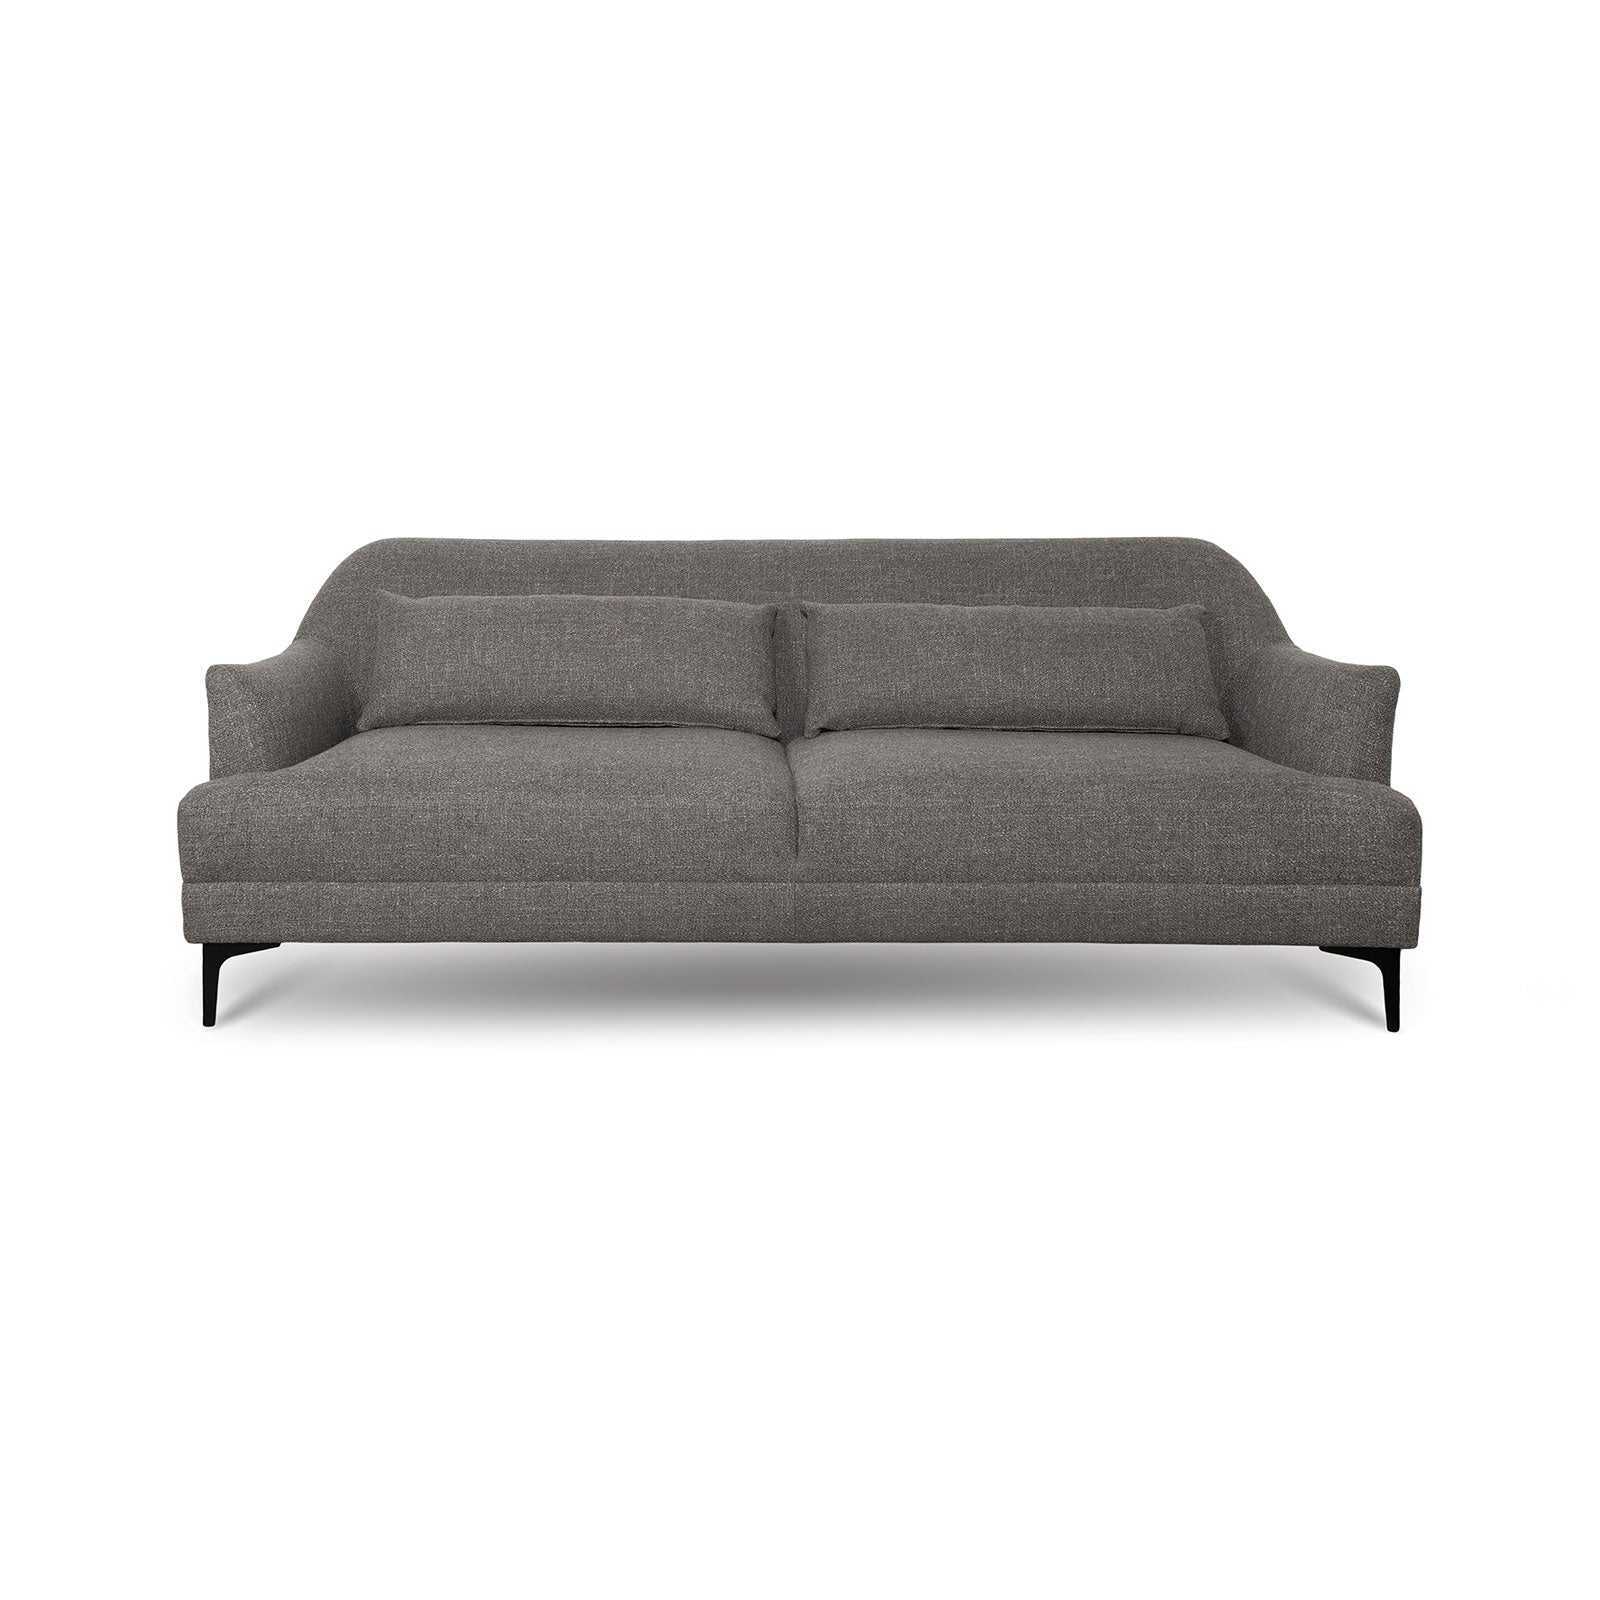 Picture of Ember Sofa - Smoke Taupe Weave